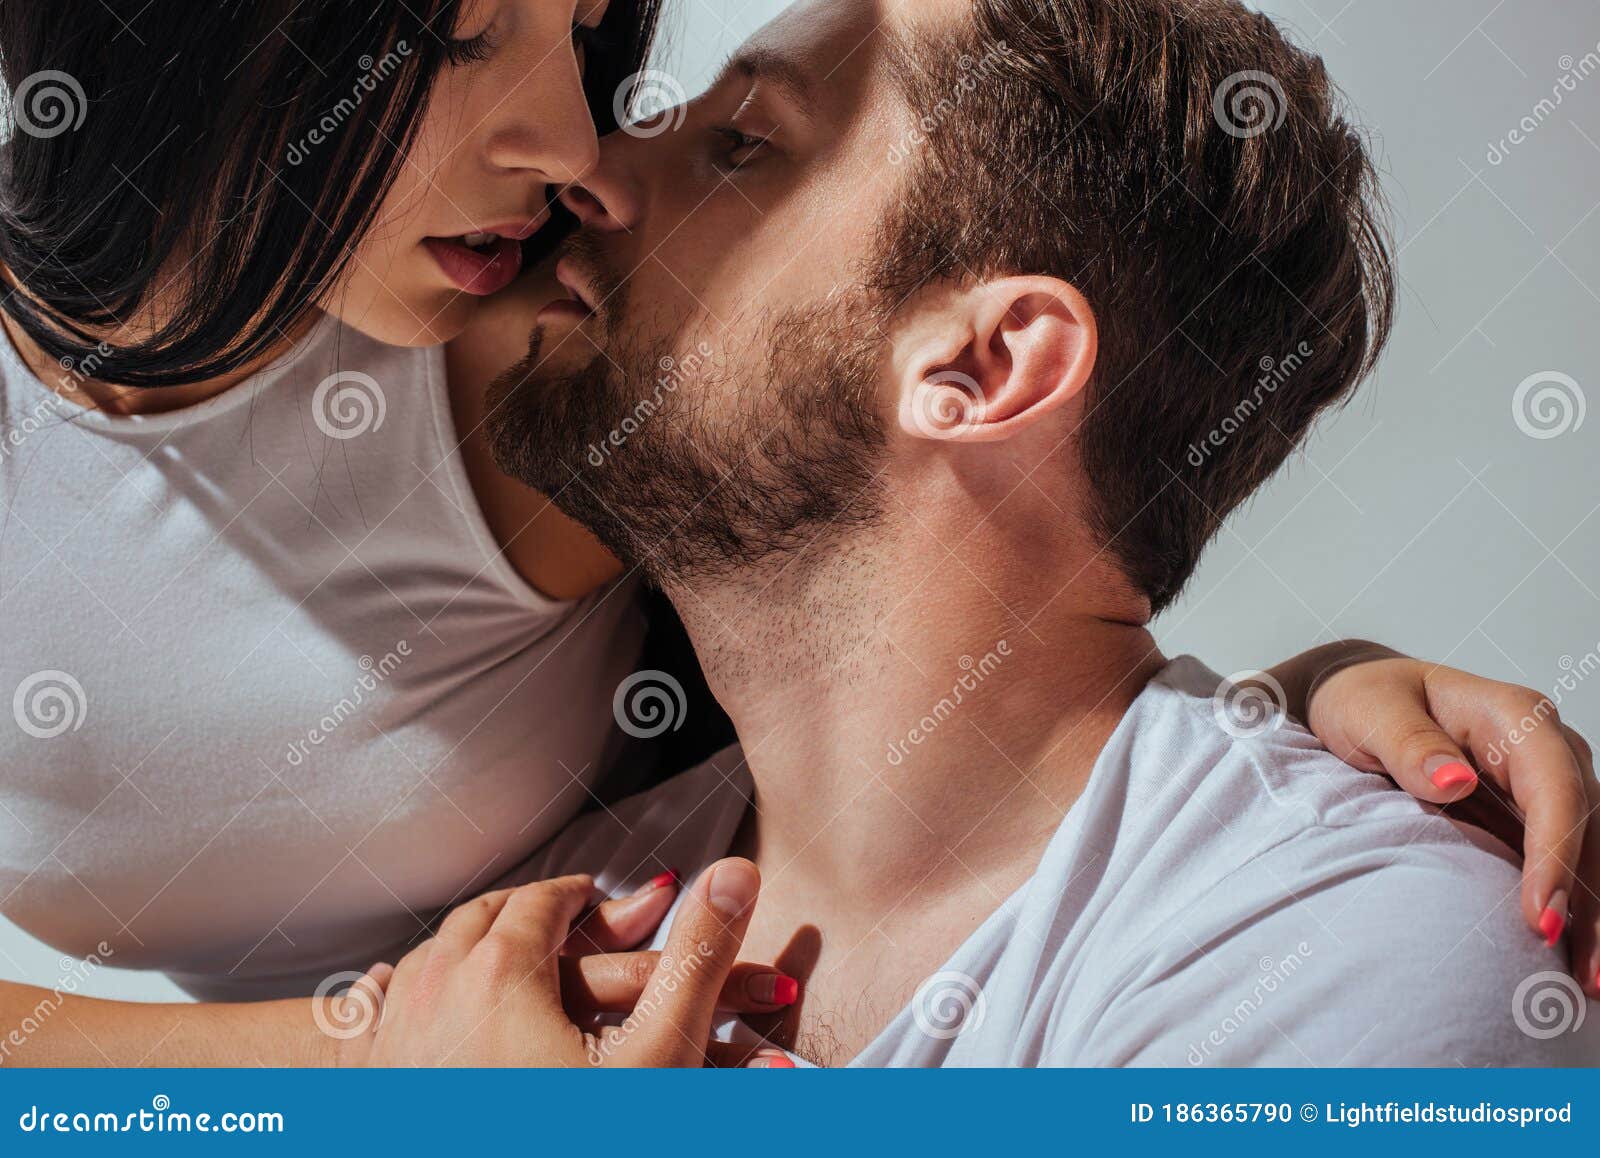 young couple in love trying to kiss each other